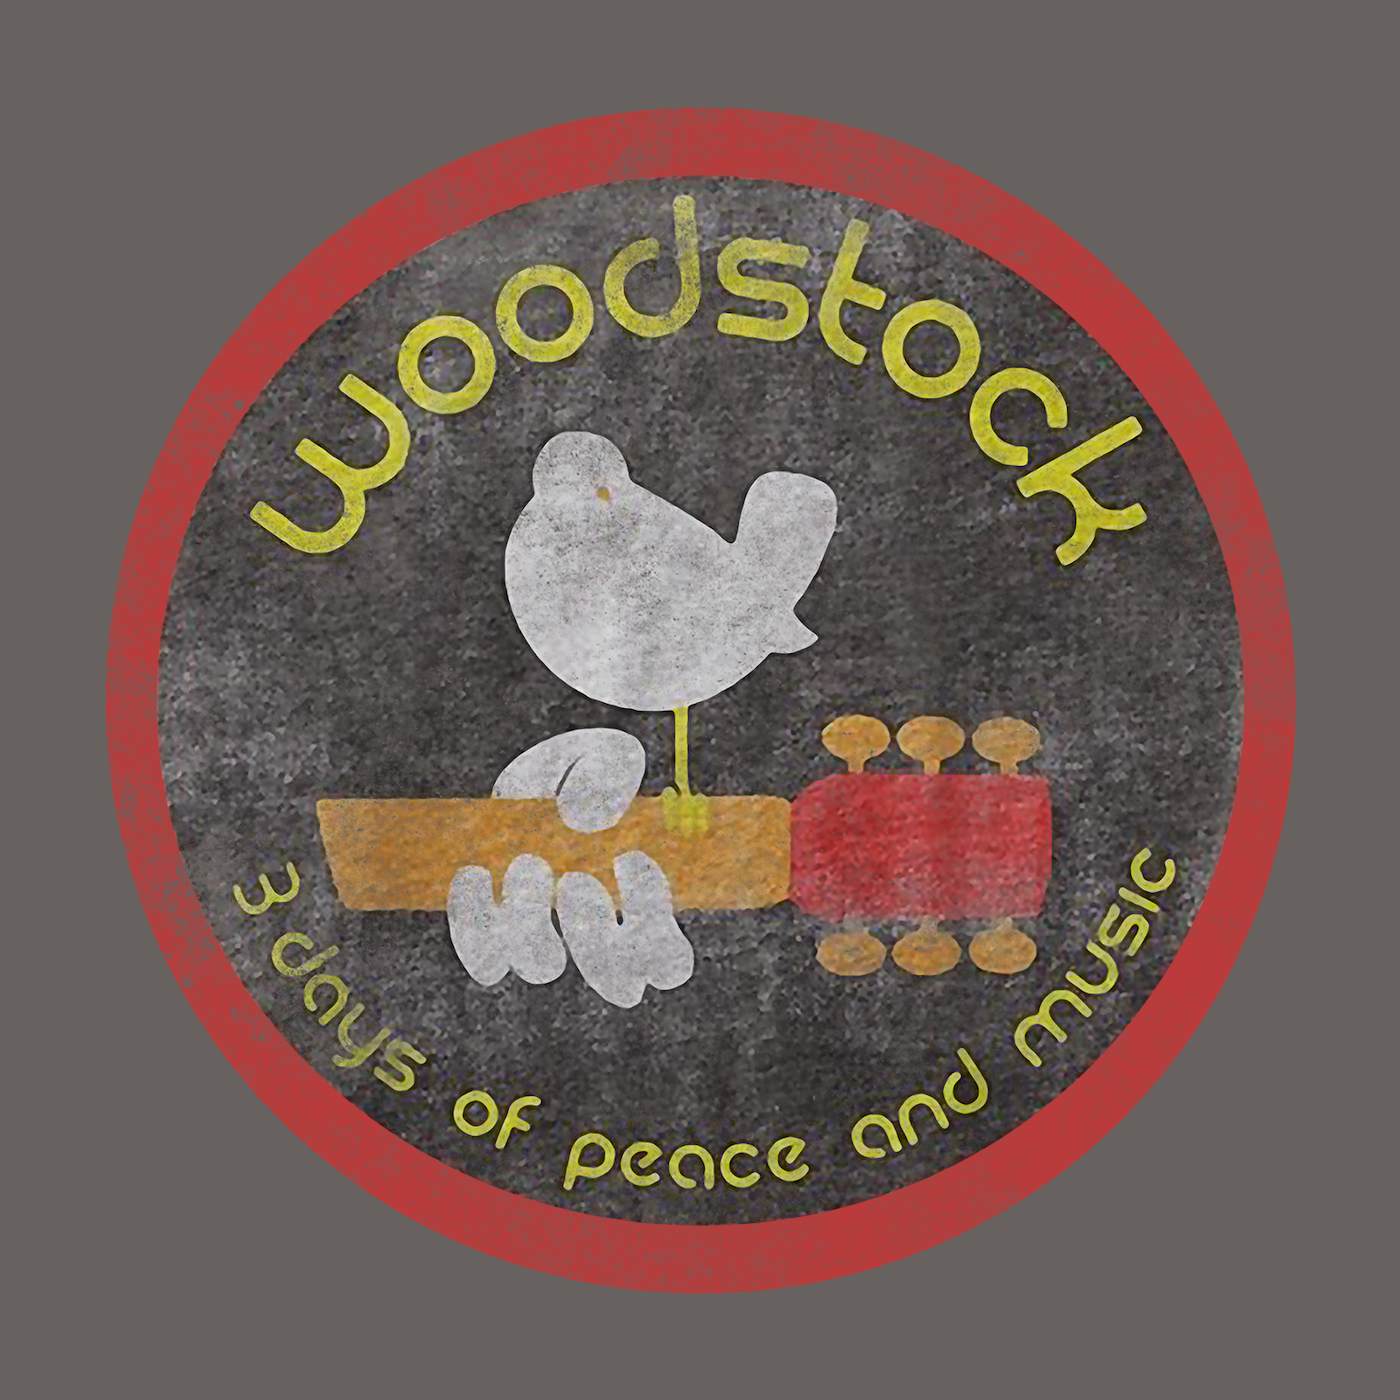 Woodstock T-Shirt | 3 Days Of Peace And Music Heather Woodstock Shirt